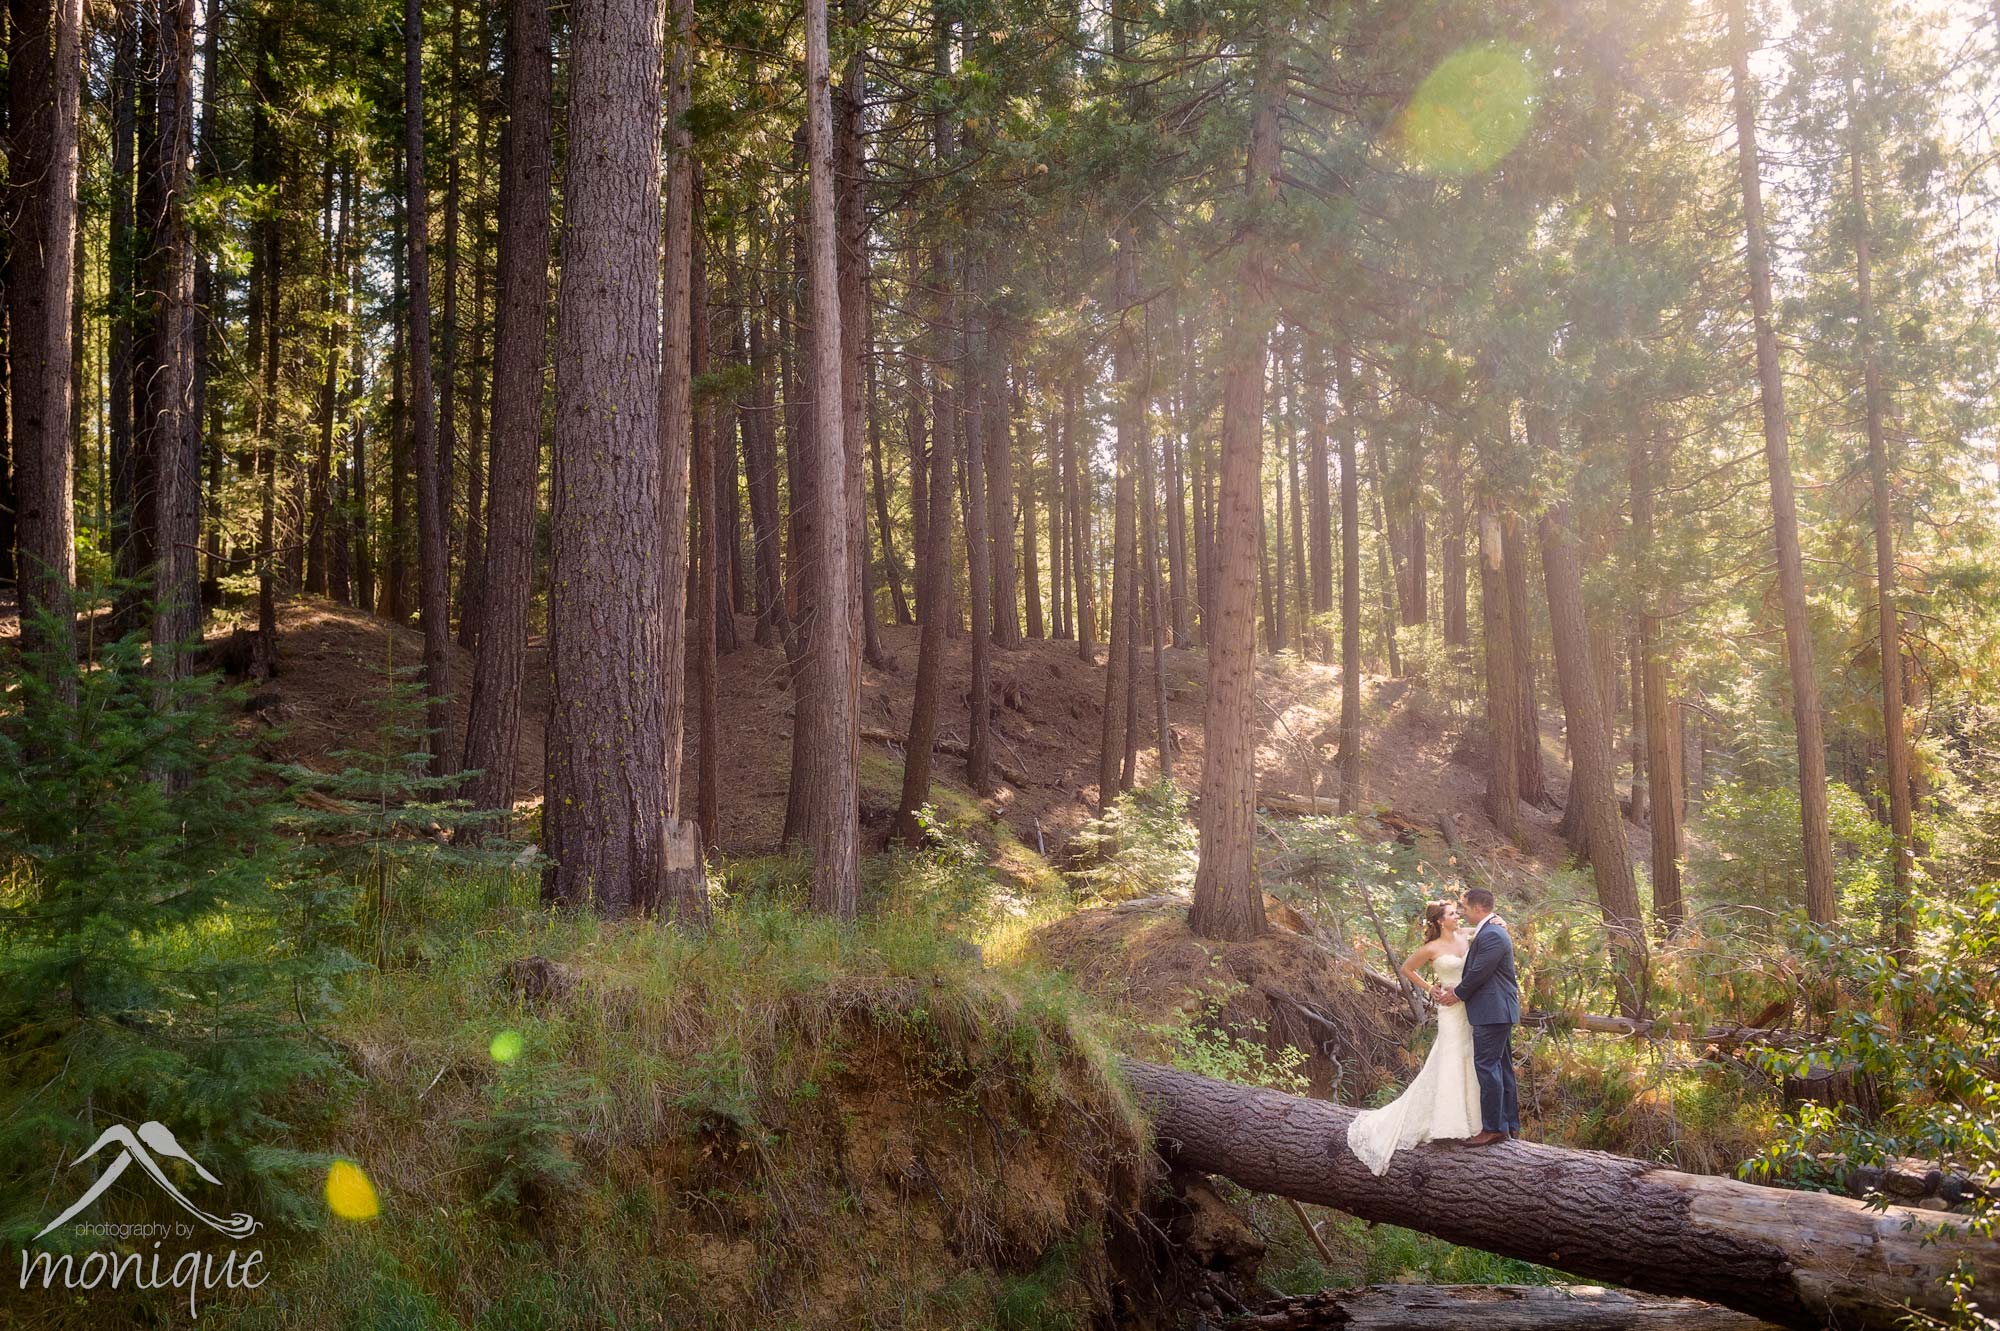 Wedding photography at the Twenty Mile House in Graeagle, California showing bride and groom on a log over a creek in a forest with beautiful light.